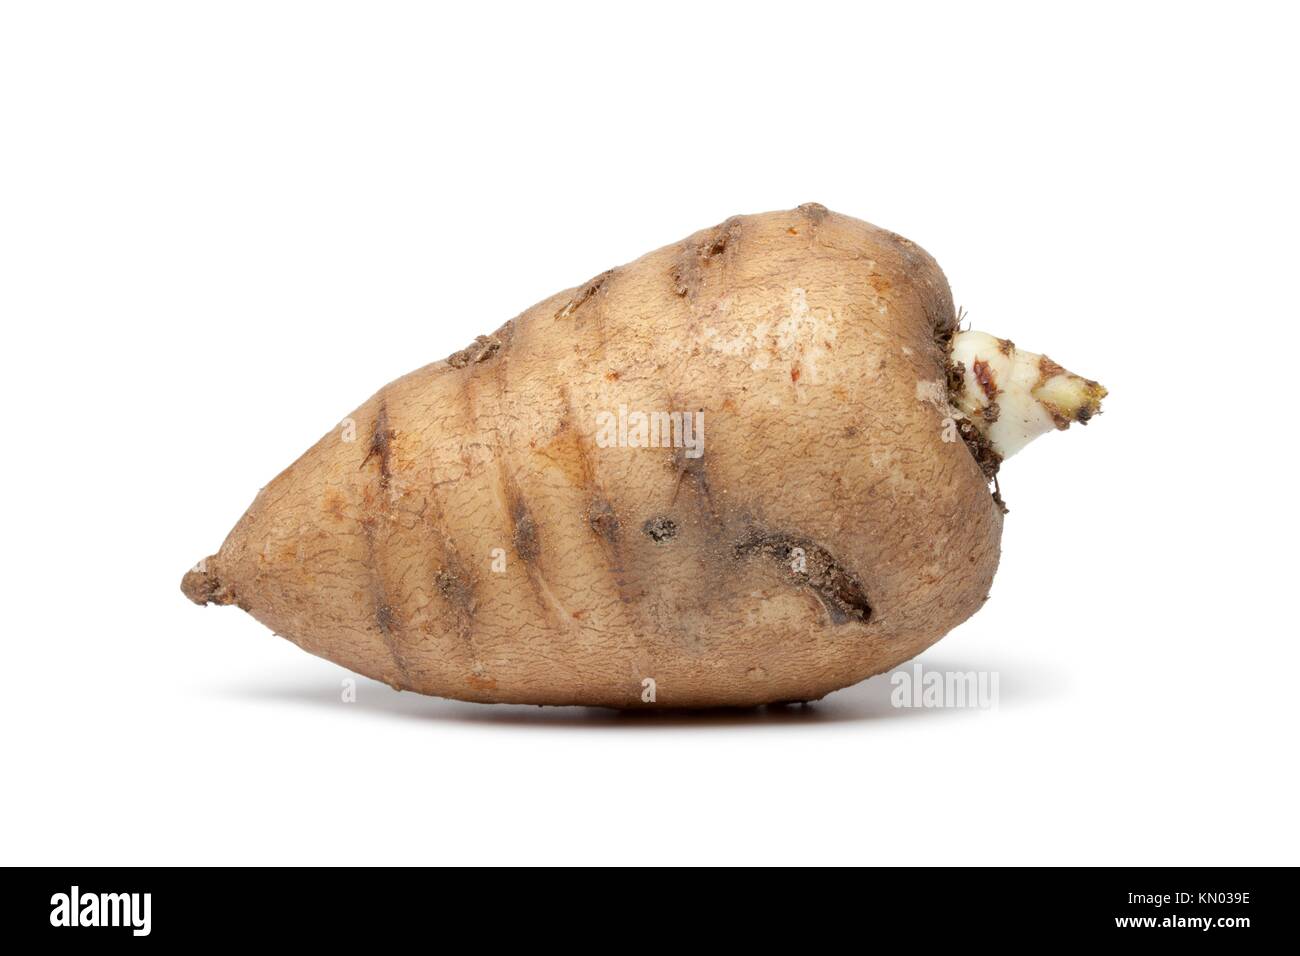 Whole single Turnip-rooted chervil on white background Stock Photo